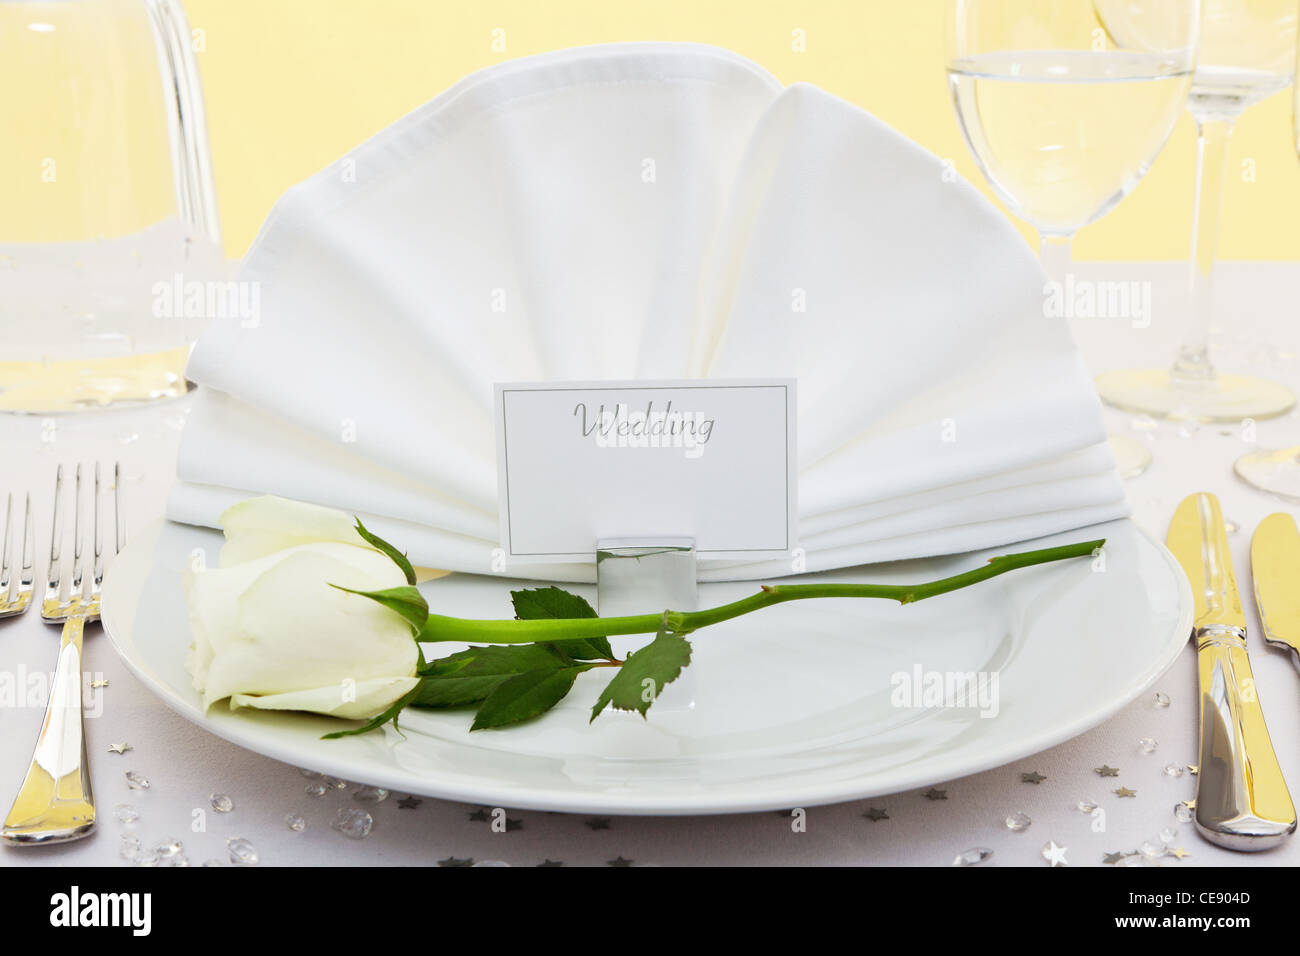 Photo of a table place setting for a wedding with a white rose on the plate. Stock Photo